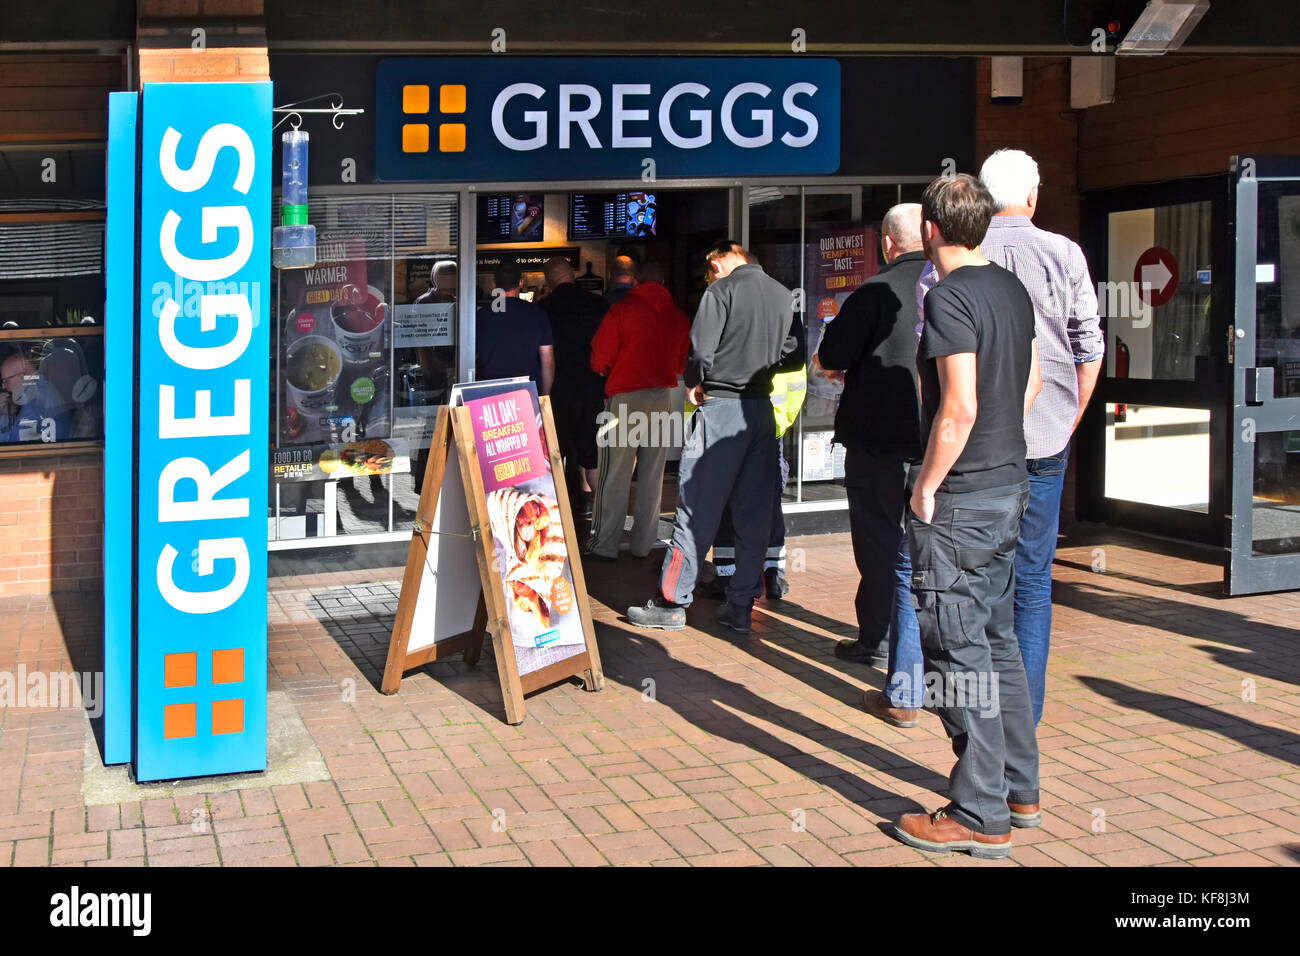 Men mostly lorry truck transport driver queuing to enter Greggs food & bakery shop at Lymm M6 motorway services in Cheshire England UK Stock Photo